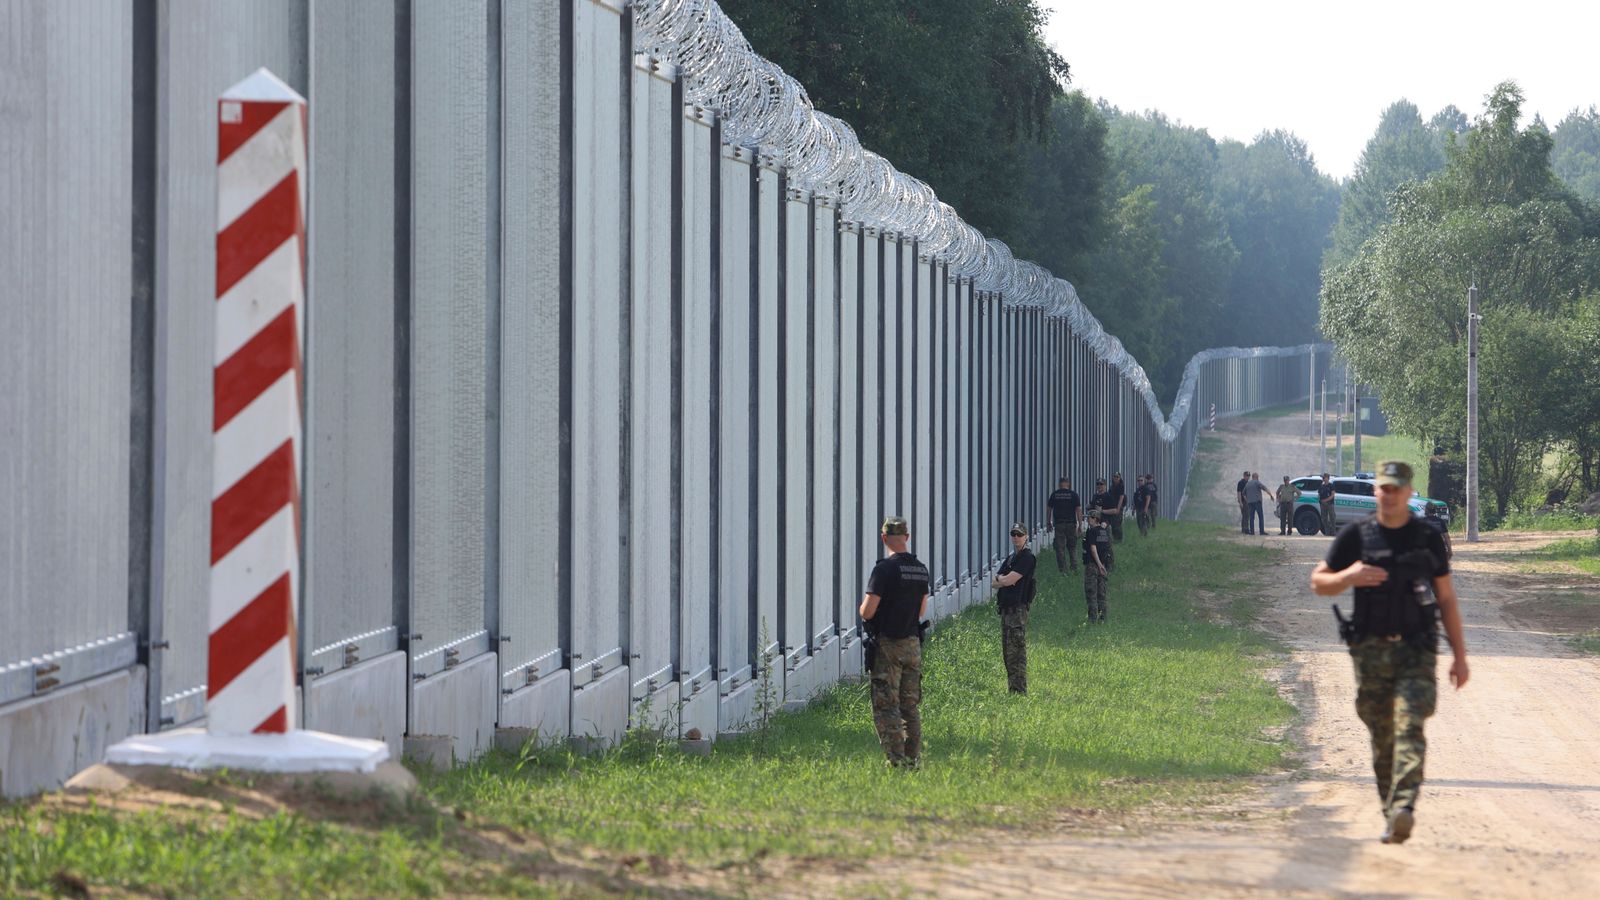 ‘Double Standards’: Poland Criticised As Steel Wall Along Border With Belarus Is Completed